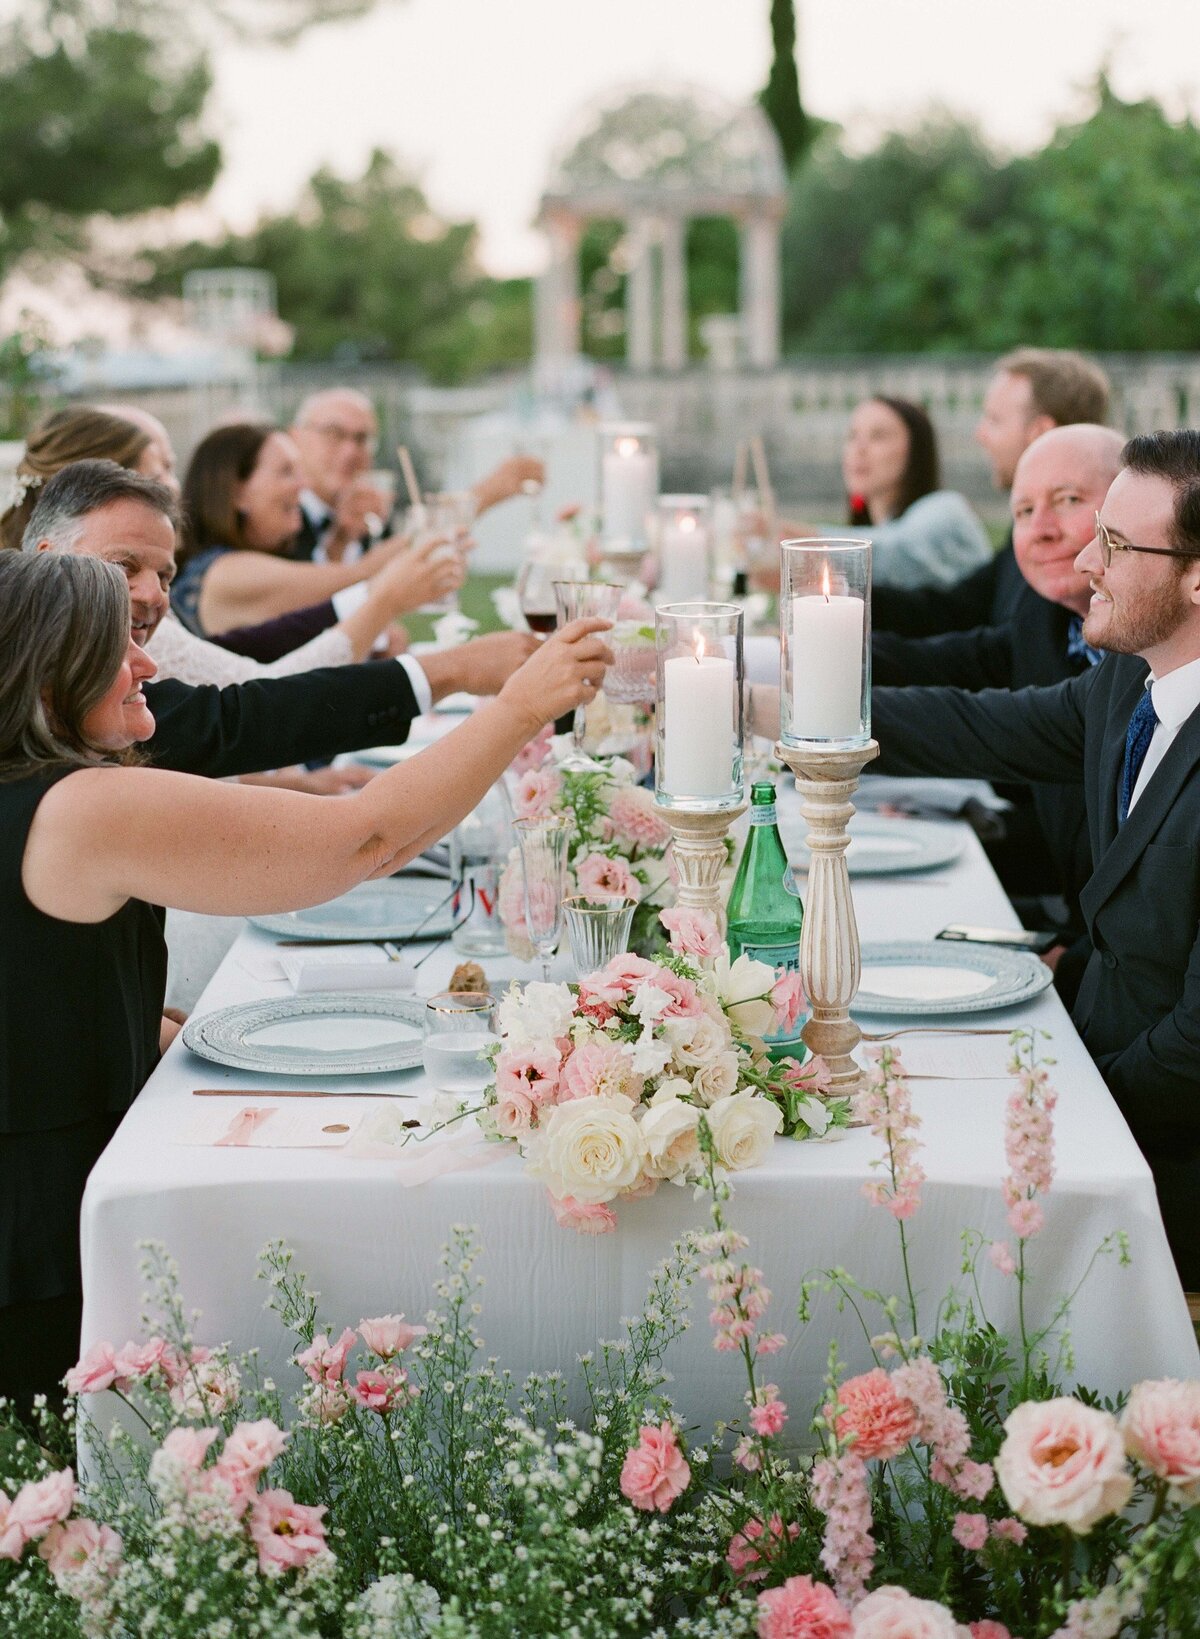 Jennifer Fox Weddings English speaking wedding planning & design agency in France crafting refined and bespoke weddings and celebrations Provence, Paris and destination Alyssa-Aaron-Molly-Carr-Photography-91